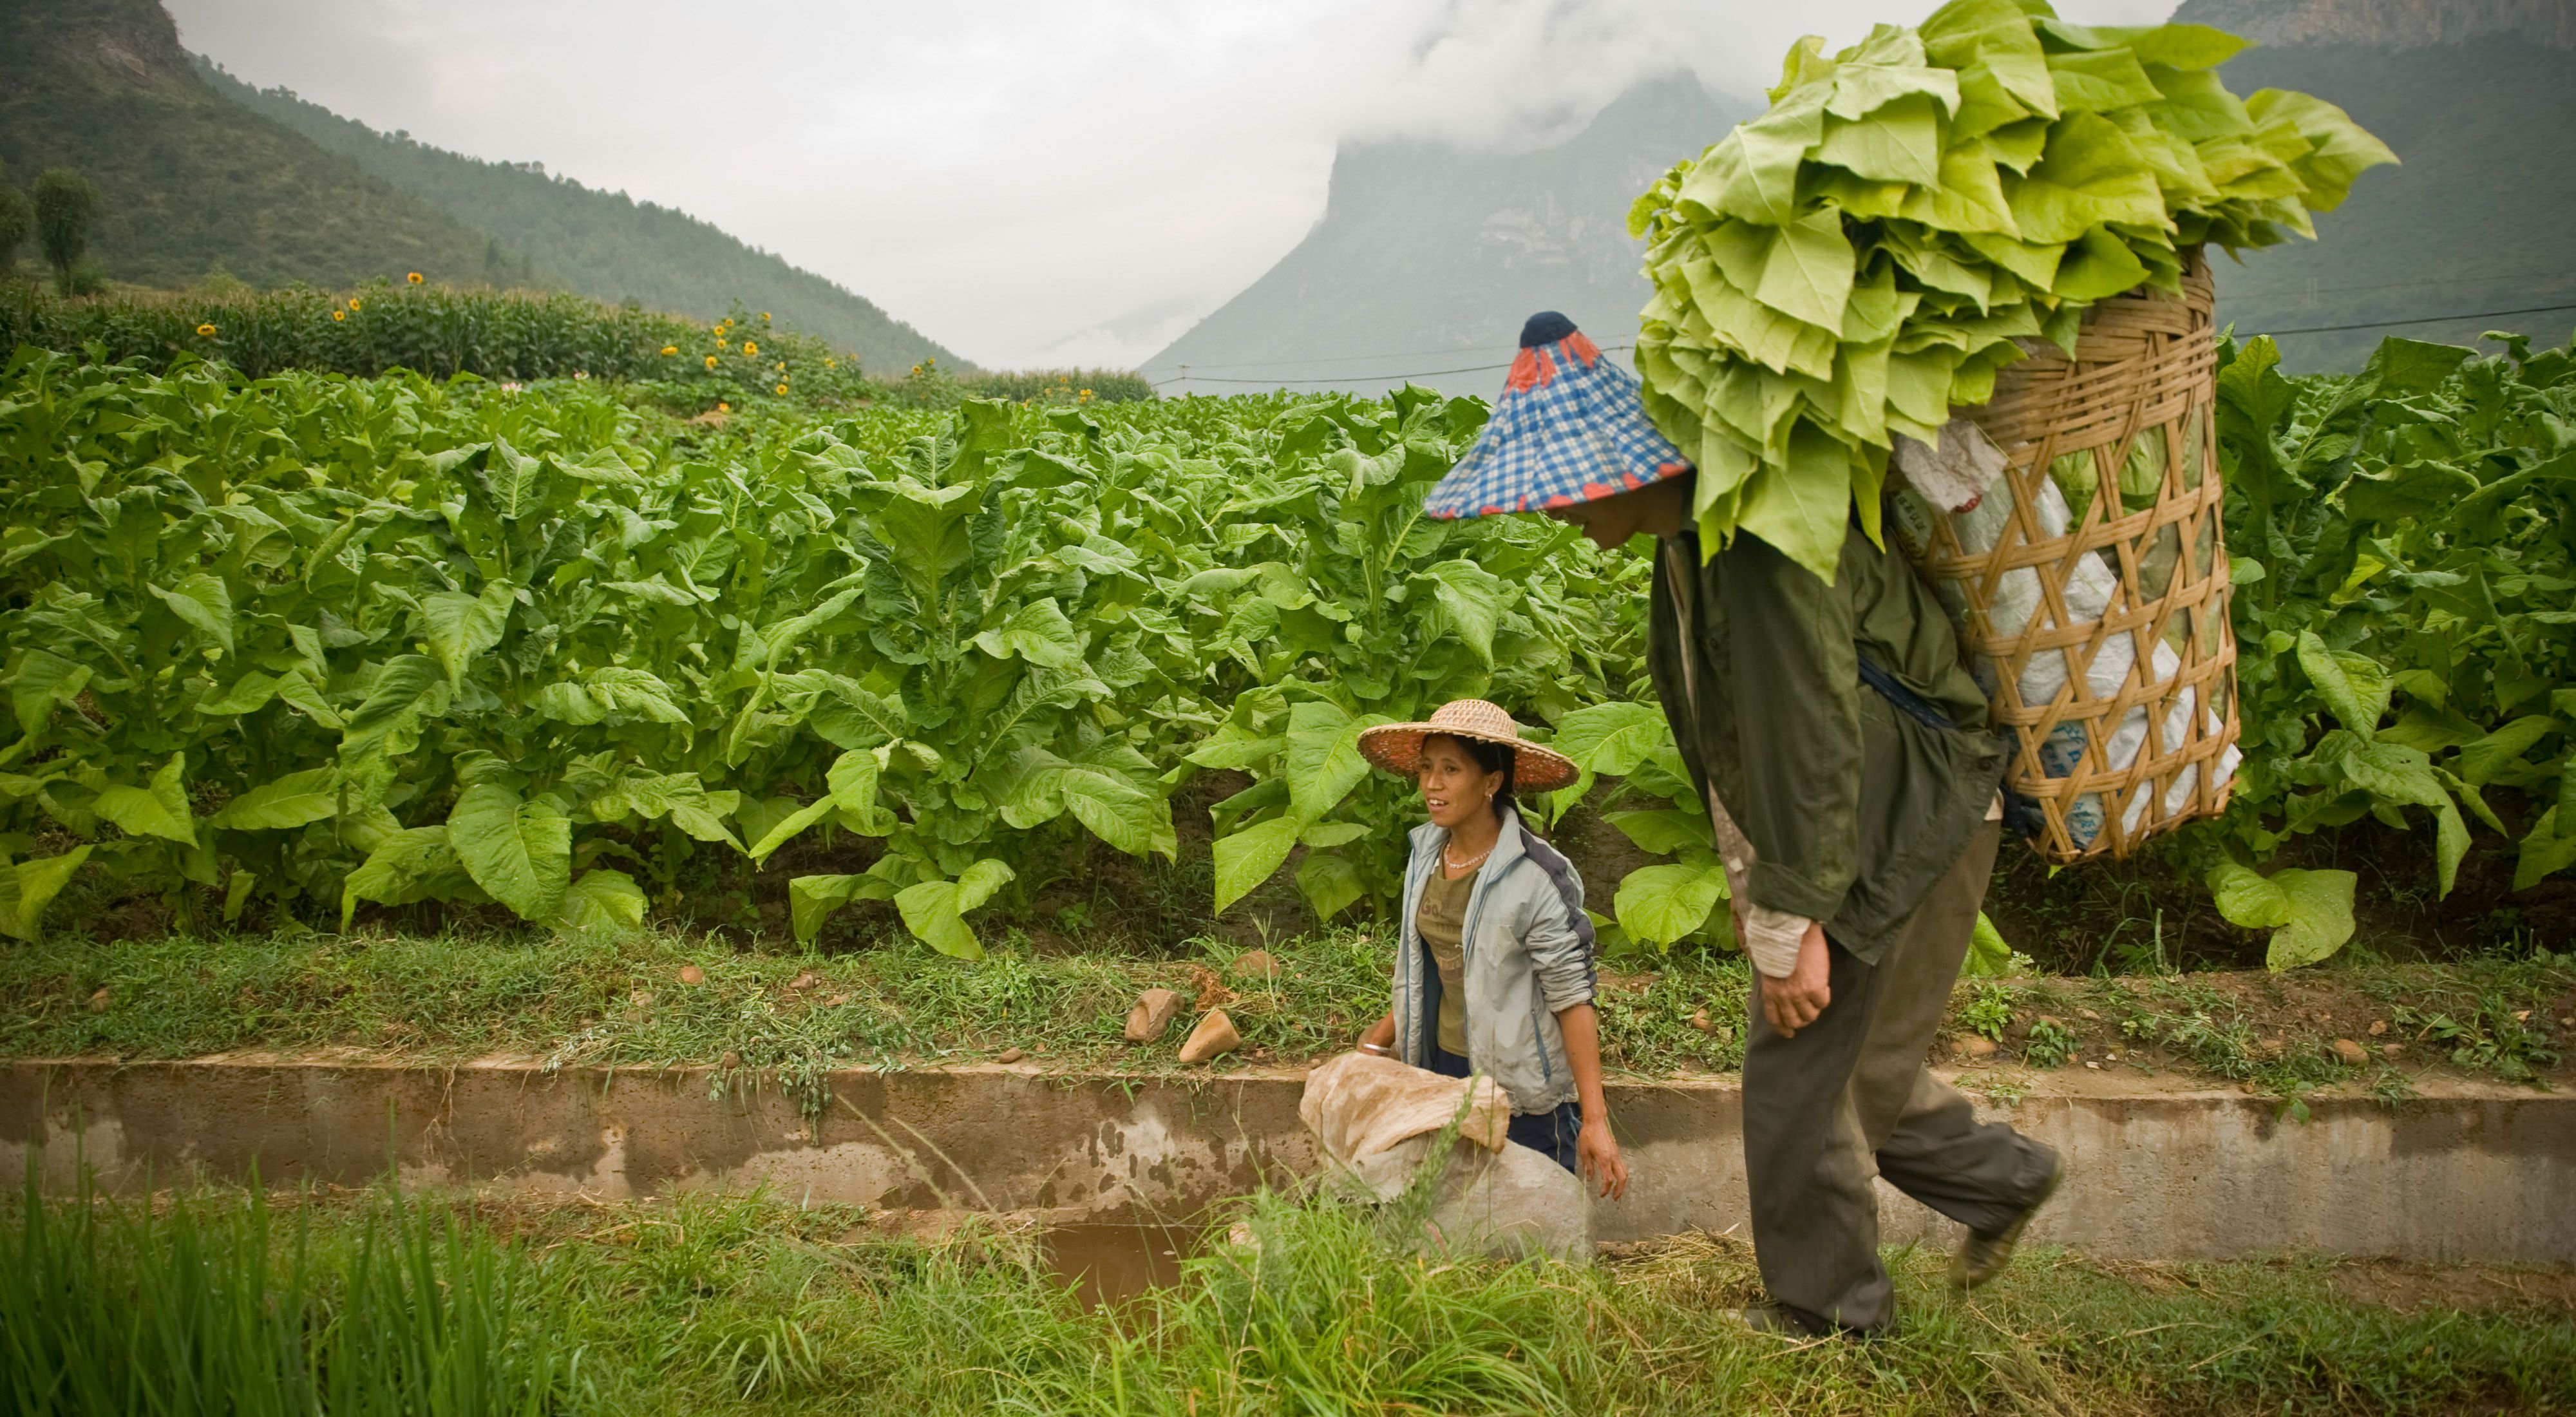 A farmer carries a basket on their back filled with leaves in front of a field.